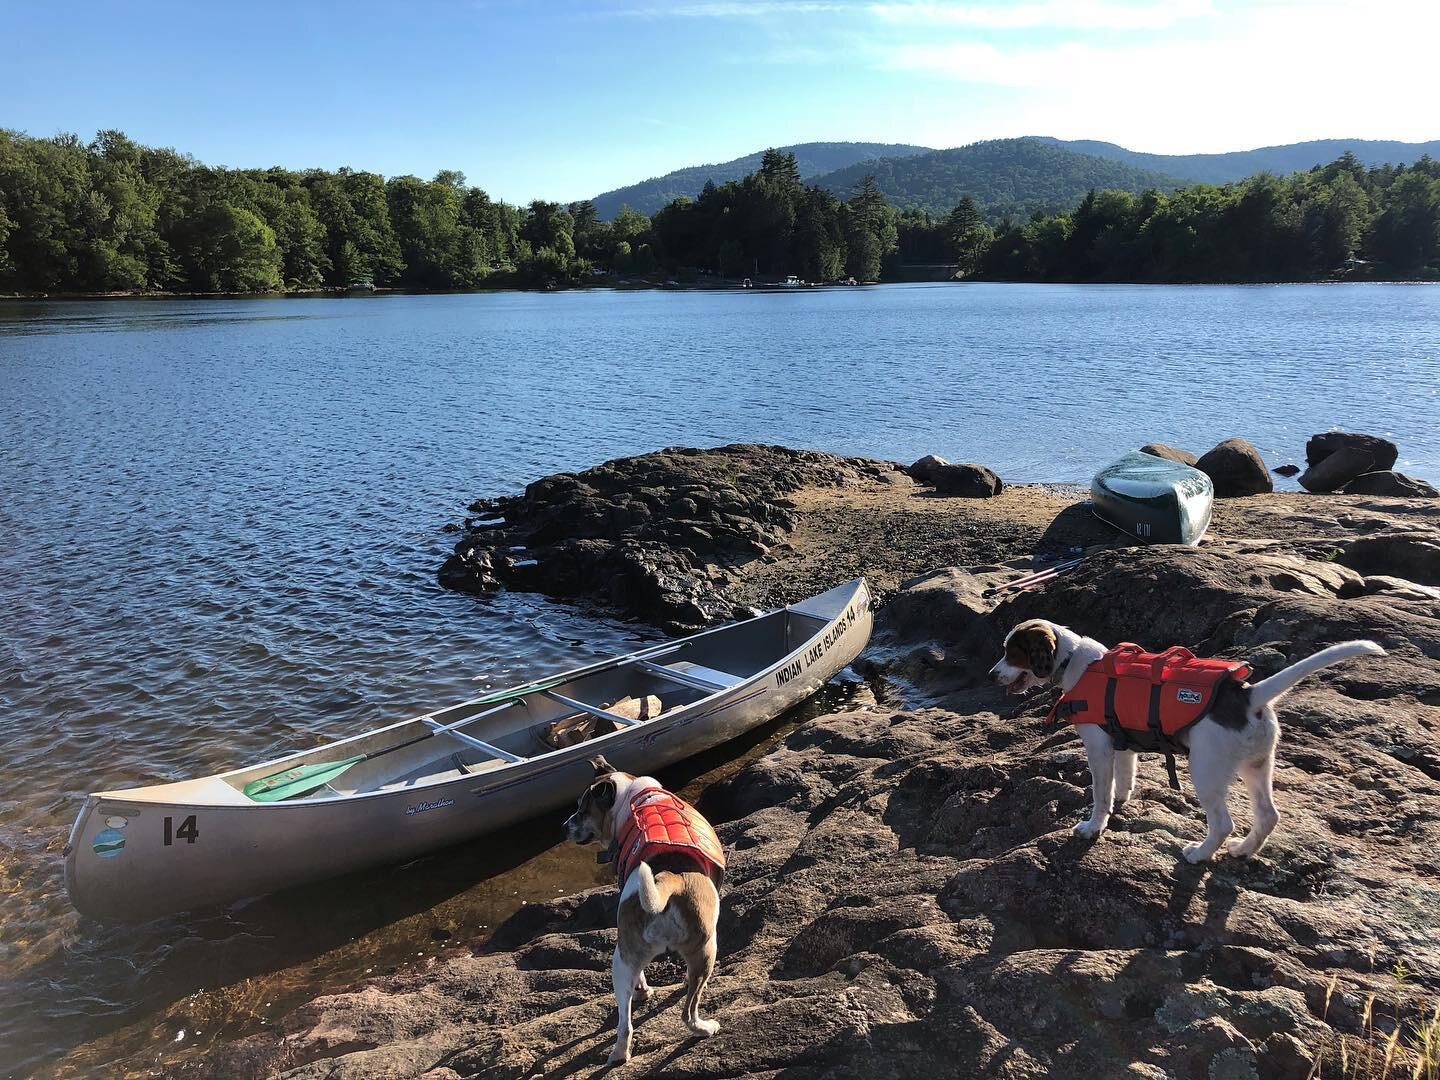 Ready for the weekend!
&amp; camping season
&amp; summer
&amp; dogs in life jackets 🛶🐶⛰
#camping #adirondacks #summer #dogsofinstagram #adventuretime #upstateny #canoecamping